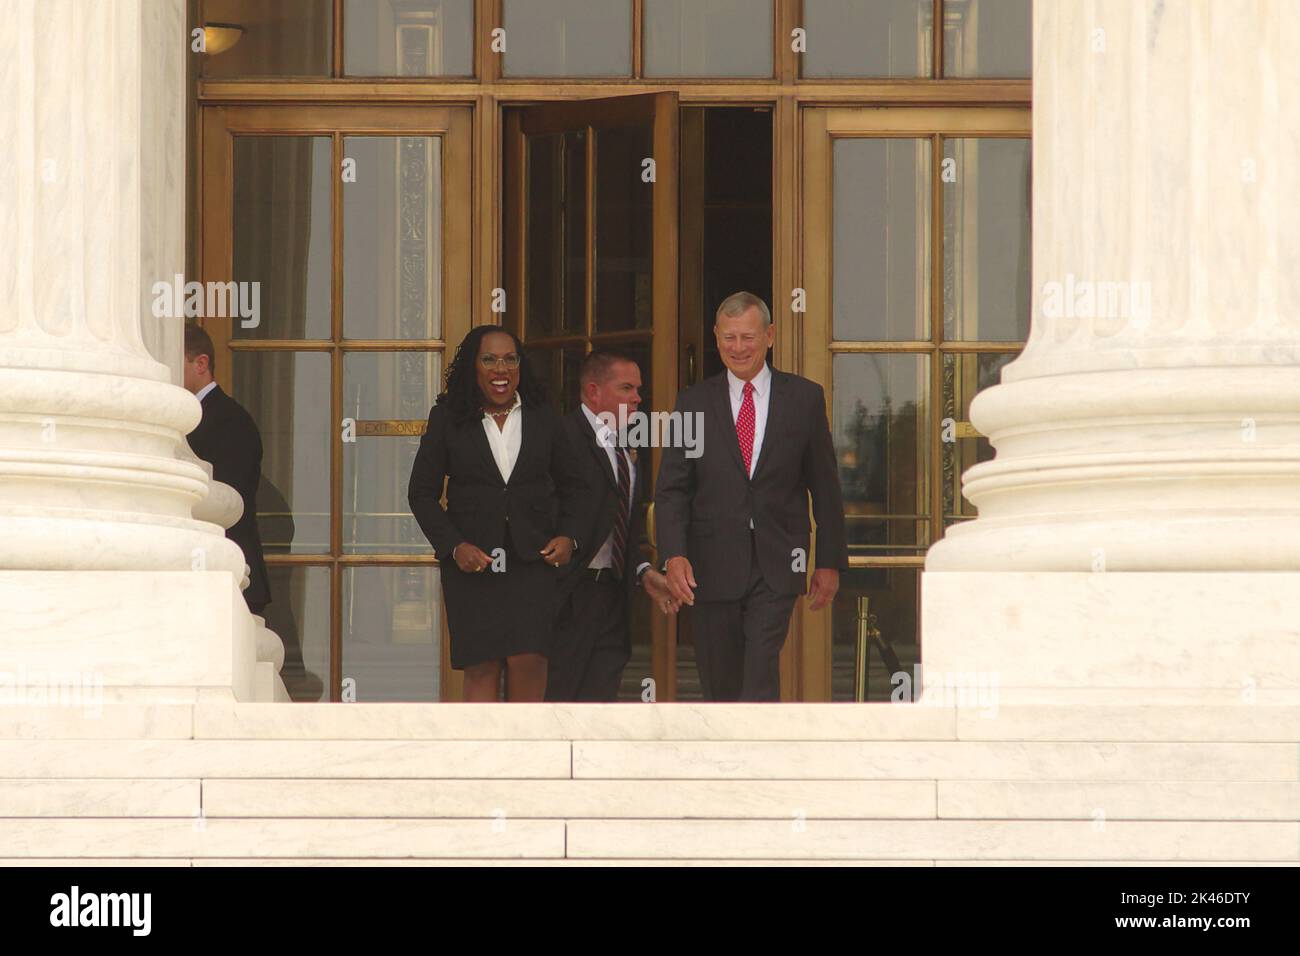 Washington DC, USA. 30 Sep 2022. Ketanji Brown Jackson, the first African-American woman to serve on the U.S. Supreme Court, appears with Chief Justice John Roberts following her ceremonial swearing-in. Credit: Philip Yabut/Alamy Live News Stock Photo